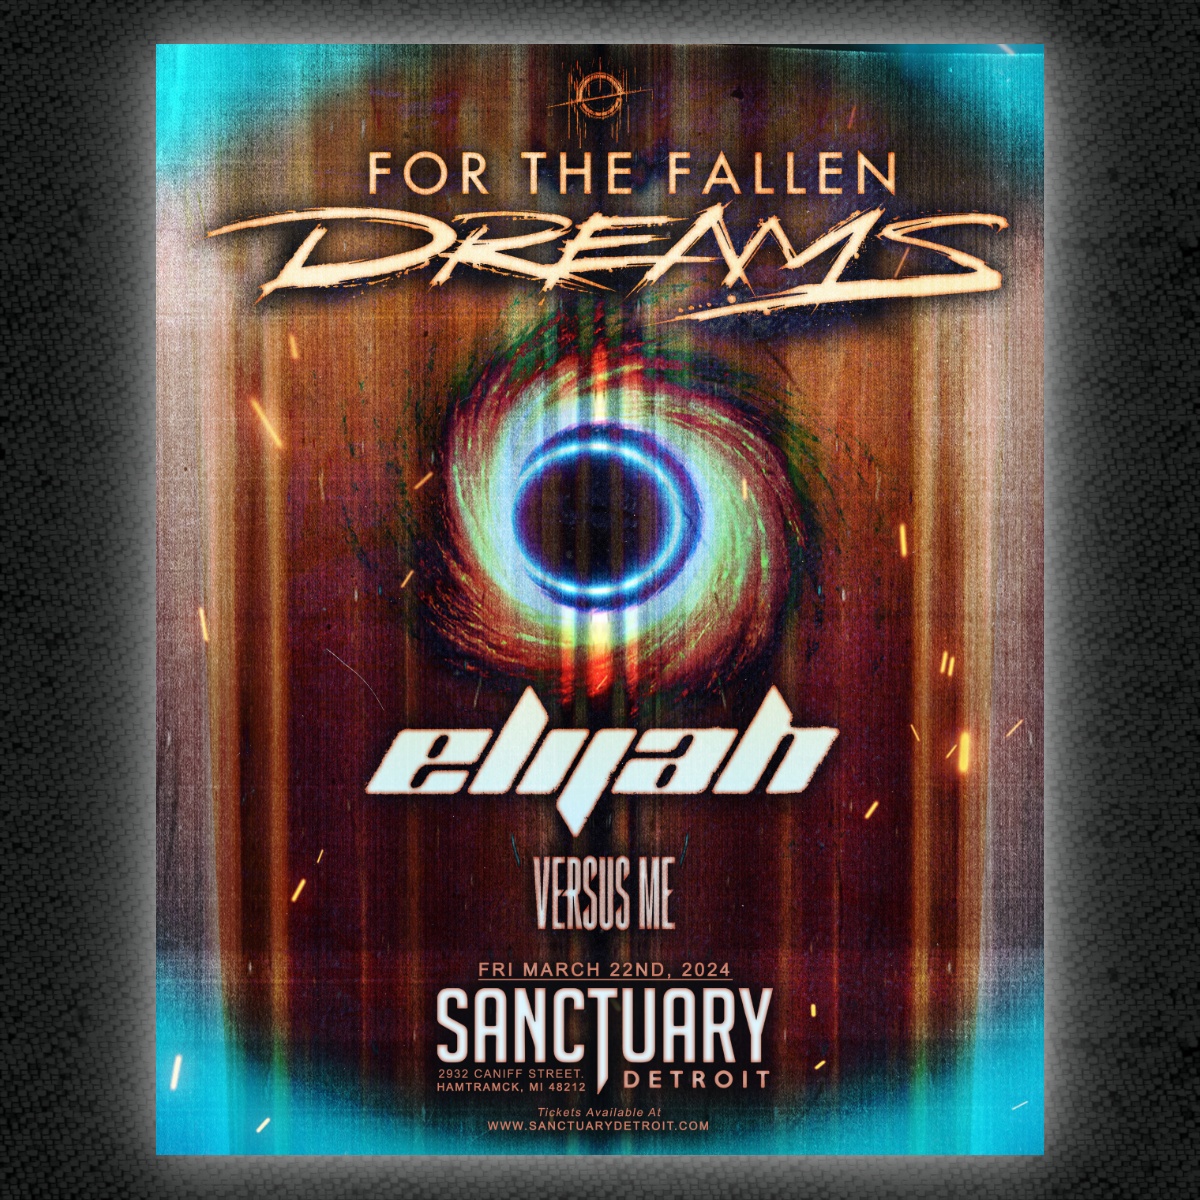 FOR THE FALLEN DREAMS returns to The Sanctuary 3/22 with special guests Elijah and Versus Me !! Tickets are on sale NOW at sanctuarydetroit.com